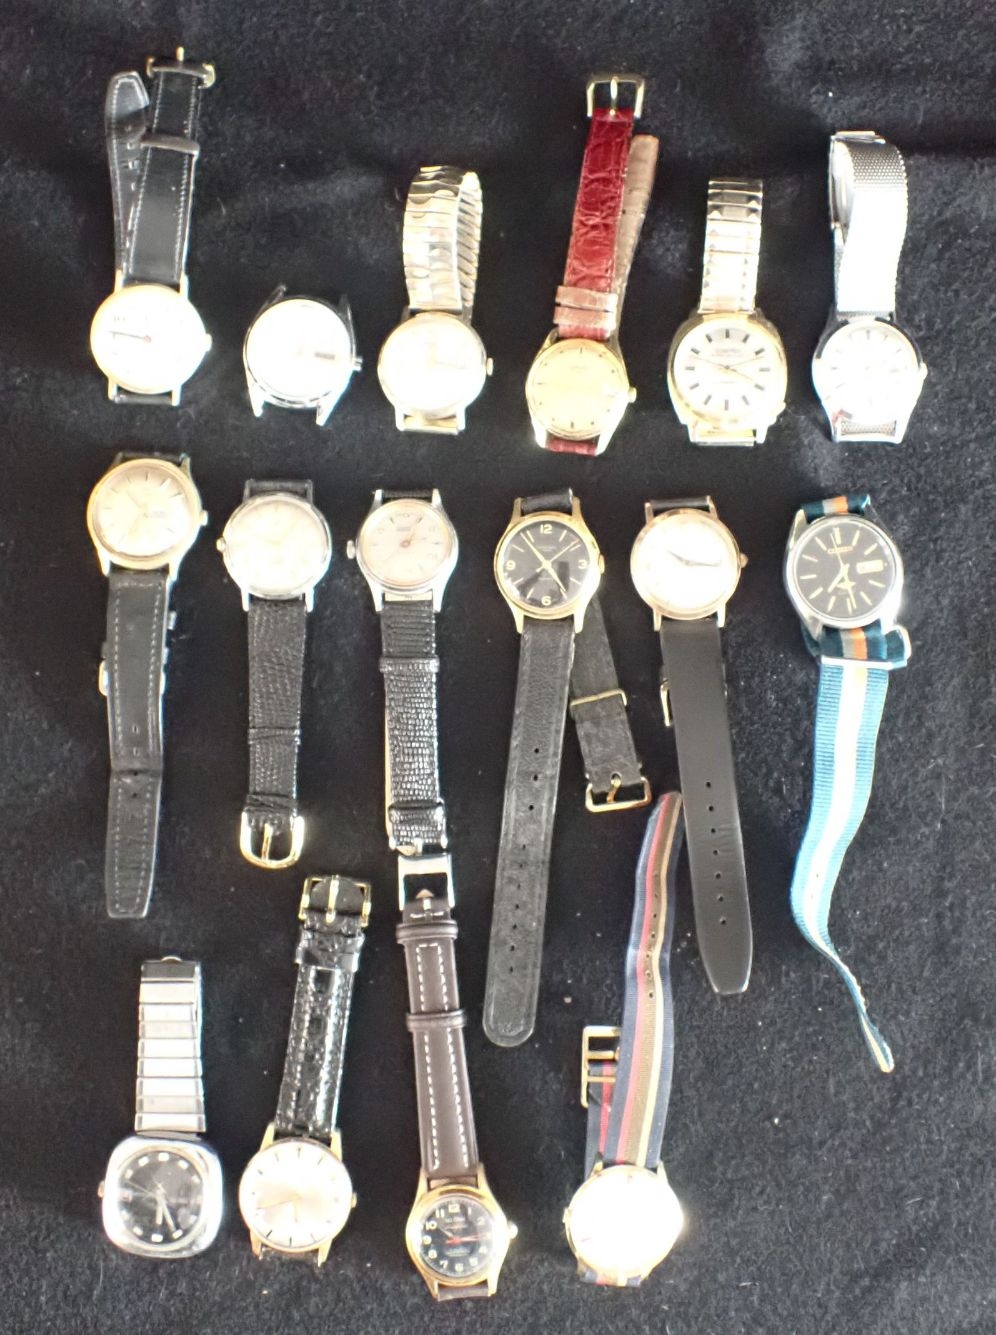 A COLLECTION OF AUTOMATIC AND MANUAL WIND WRISTWATCHES various makes